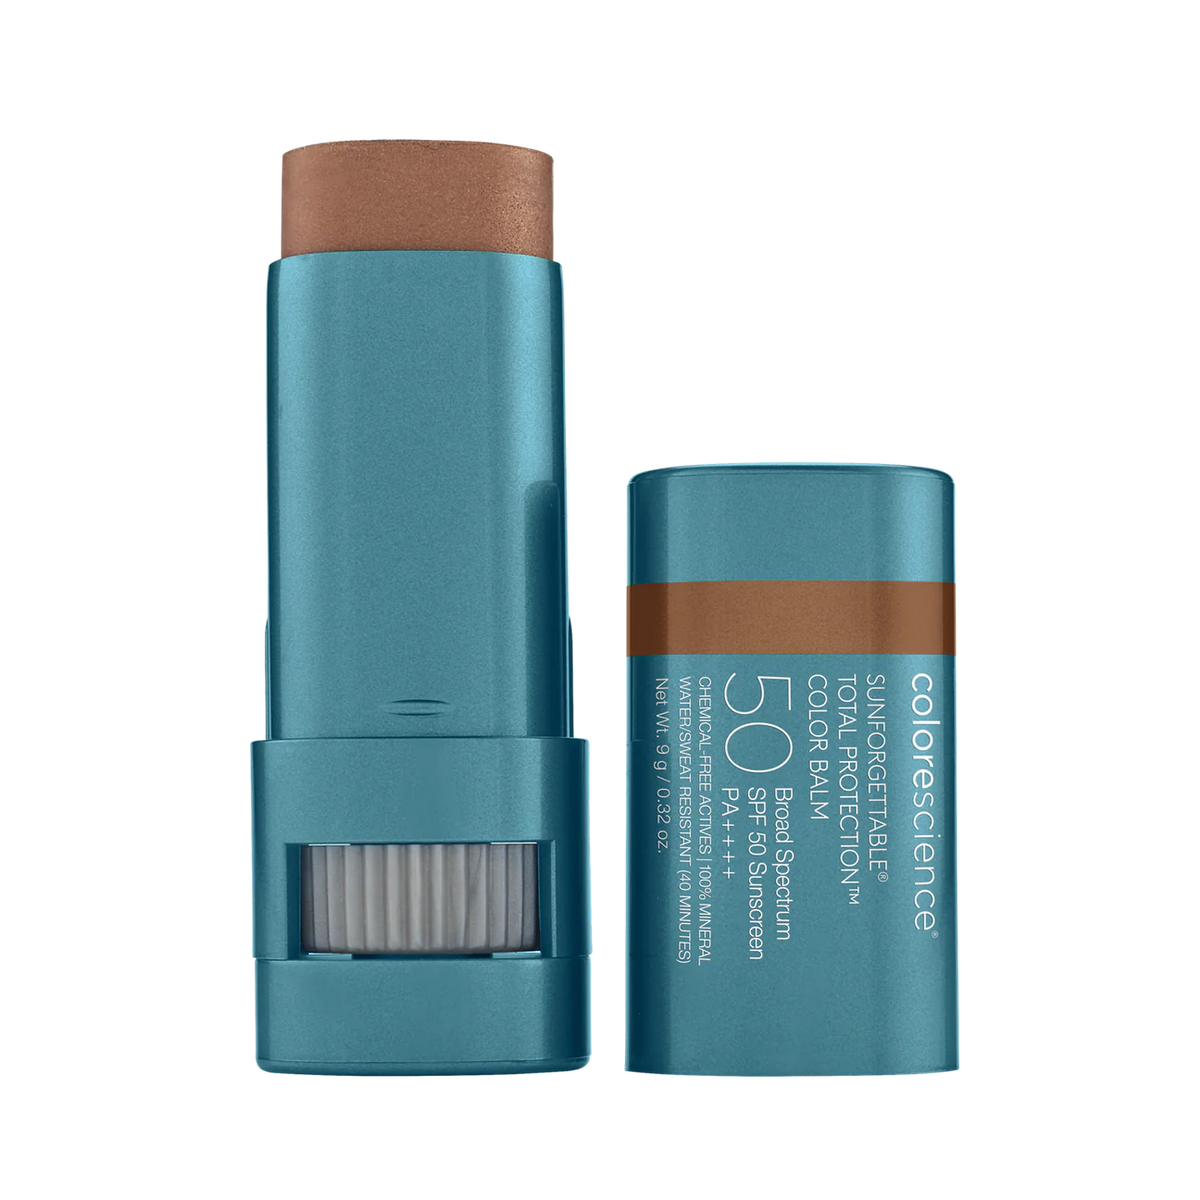 Total protection color balm SPF50